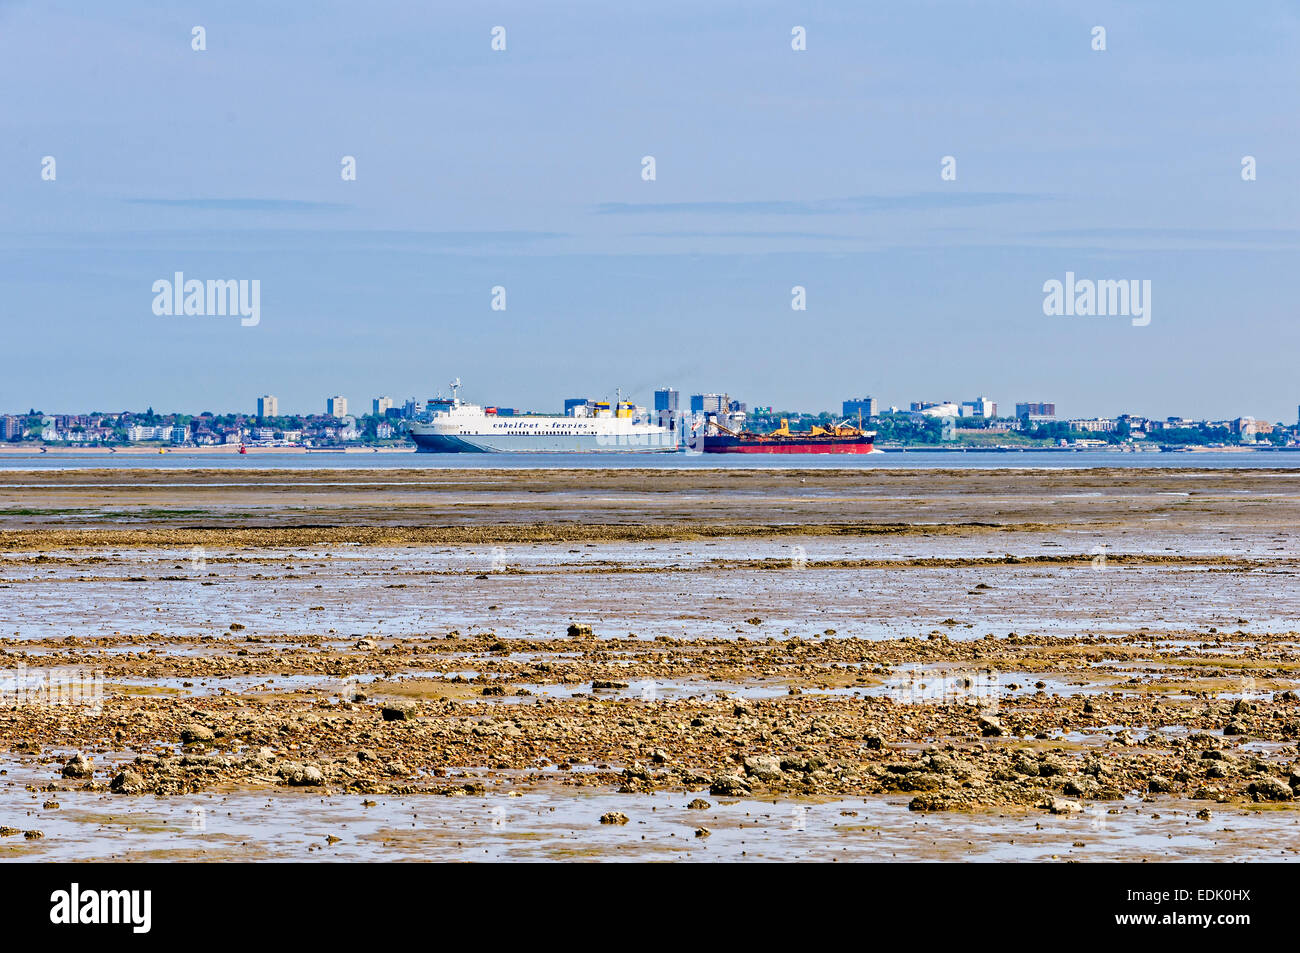 Two ships sail in opposite directions on a tranquil River Thames bordered by a shingle muddy beach and a green urban landscape Stock Photo